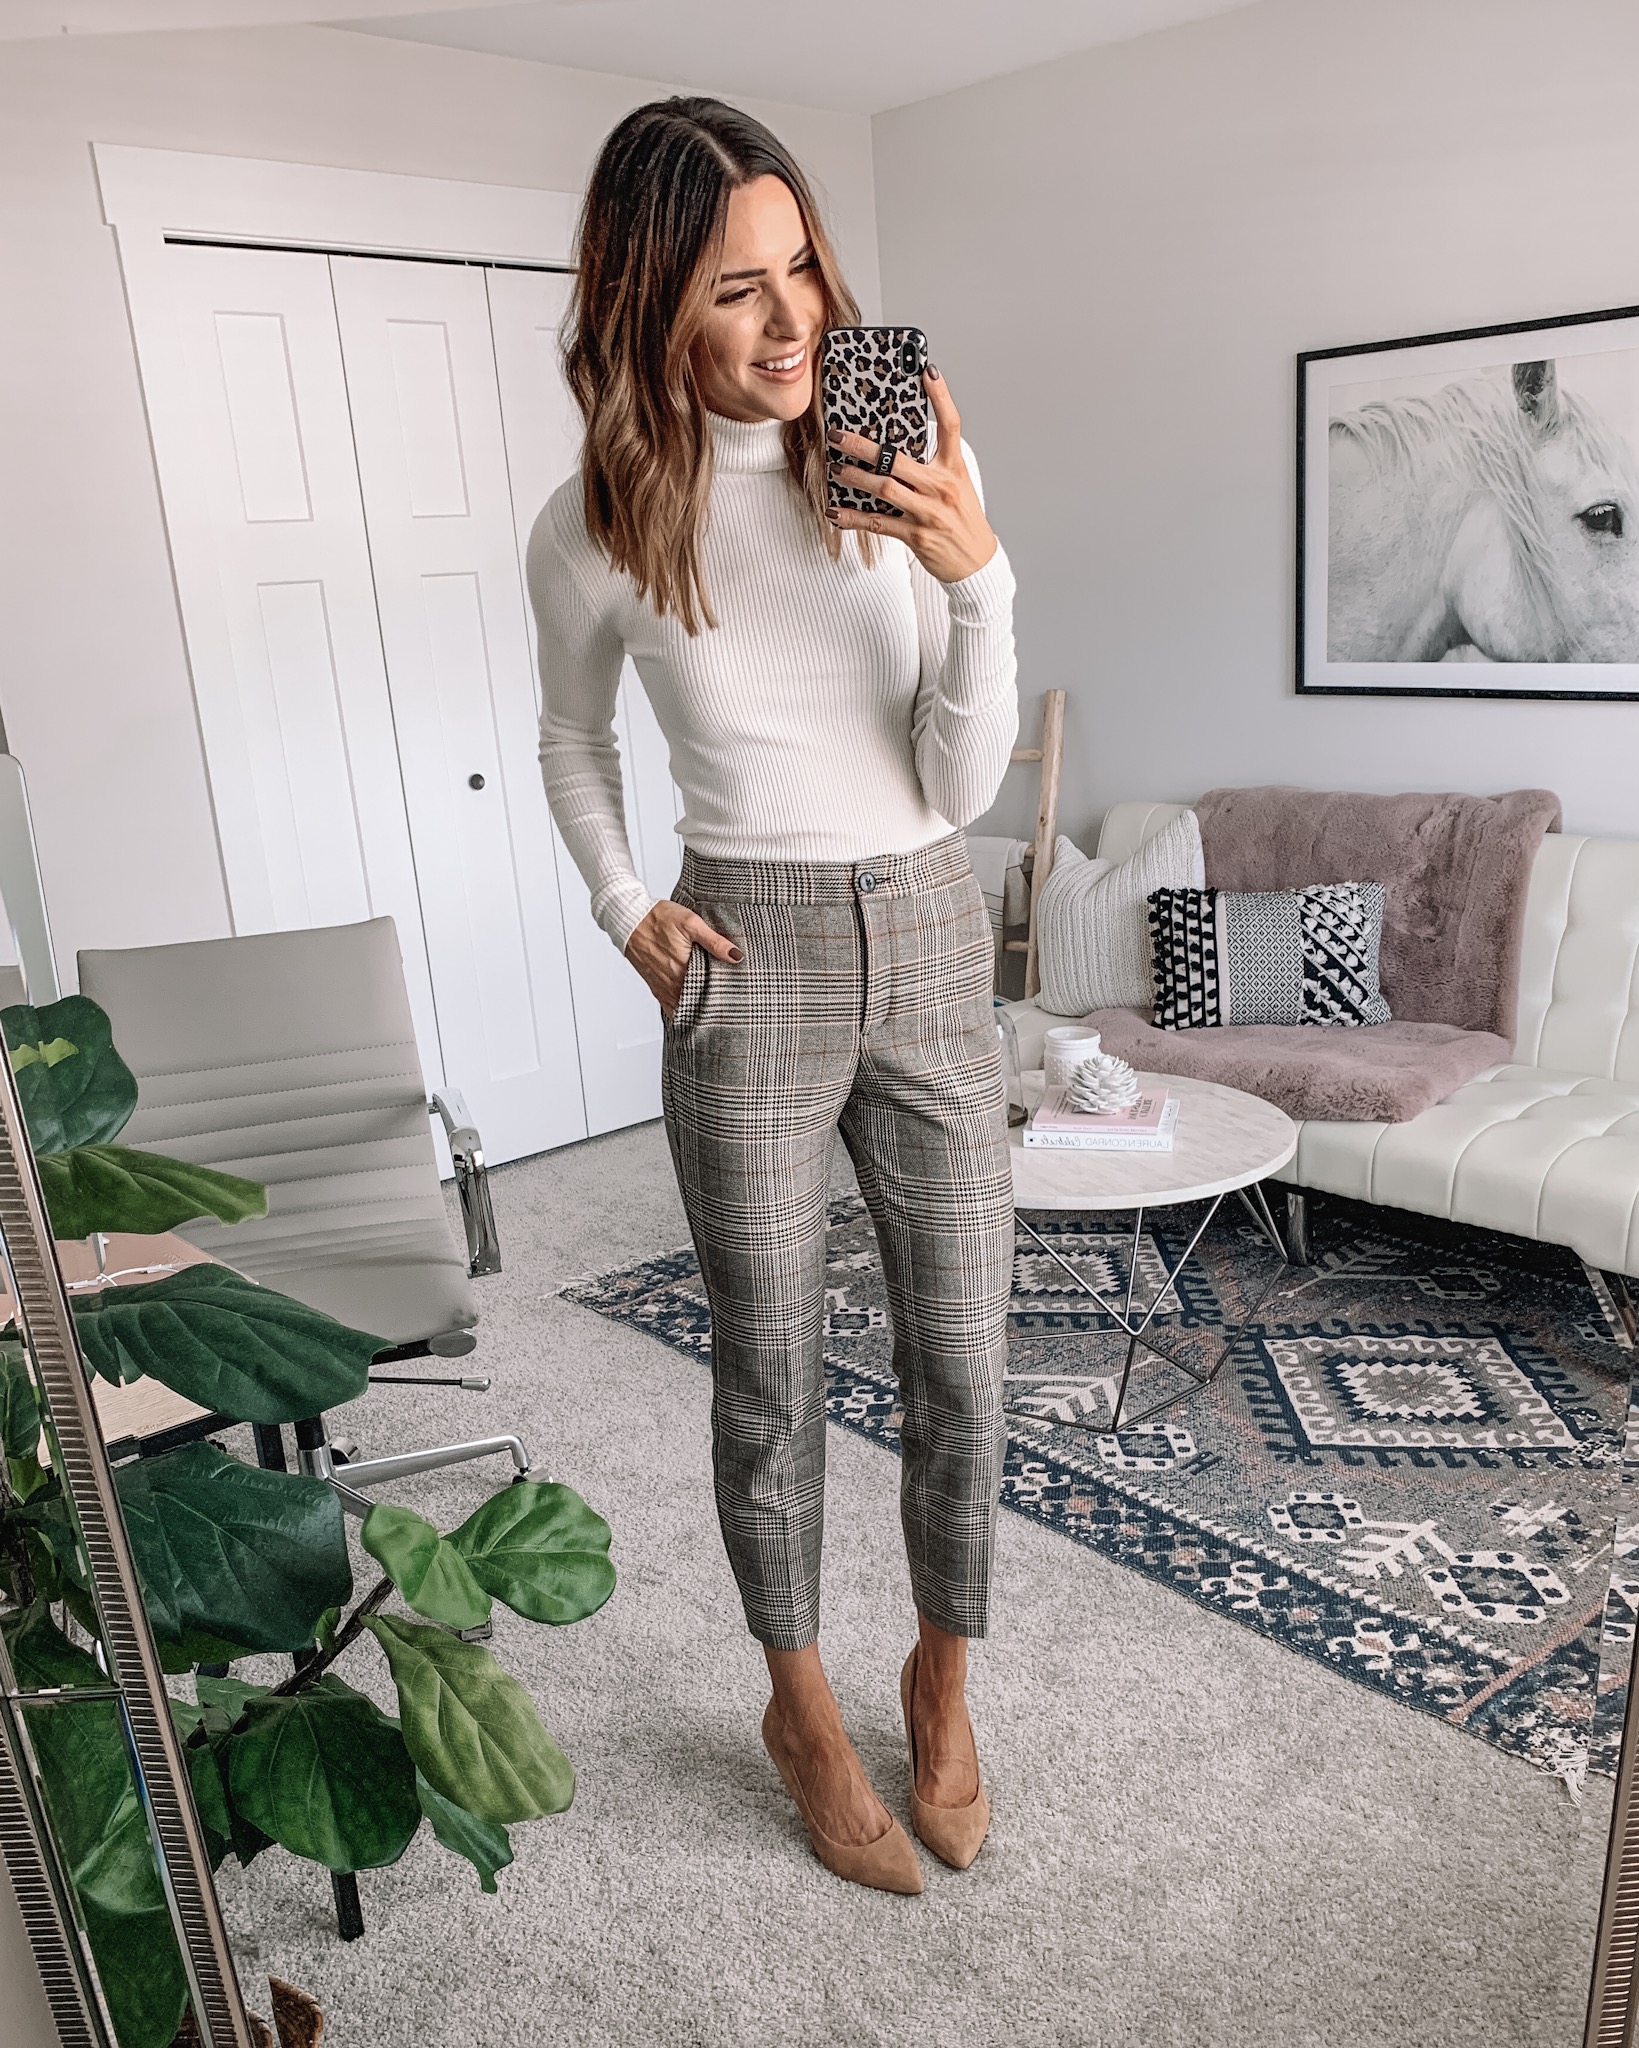 how to style plaid pants, workwear outfit fall, express, polene Paris bag